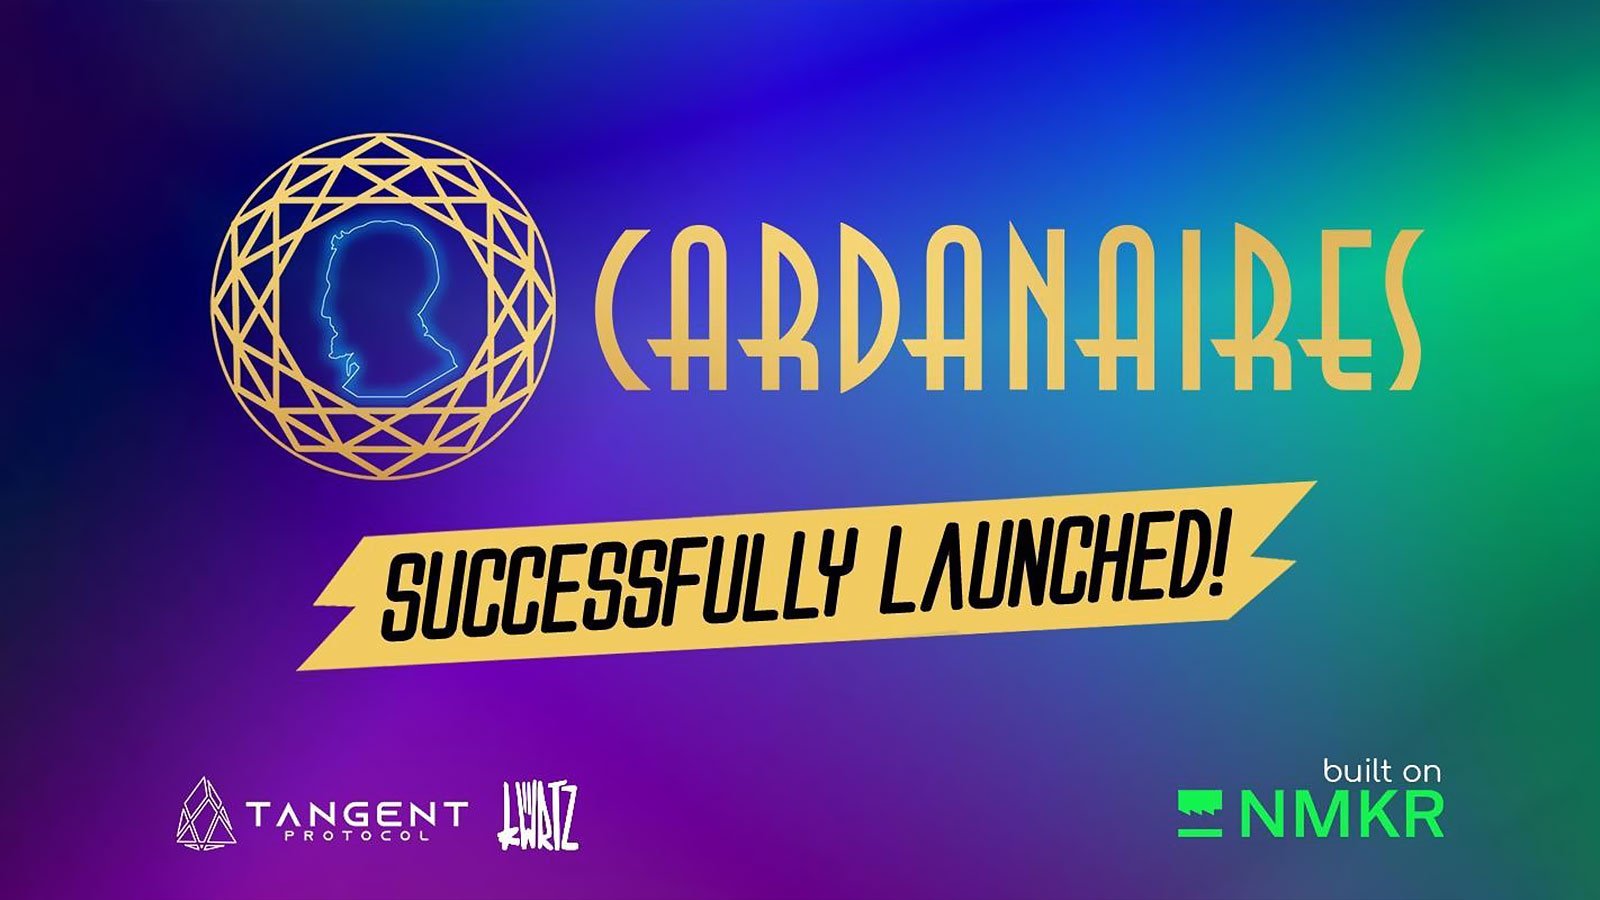 Cardano-Based Collectibles “The Cardanaires” Launches Successfully